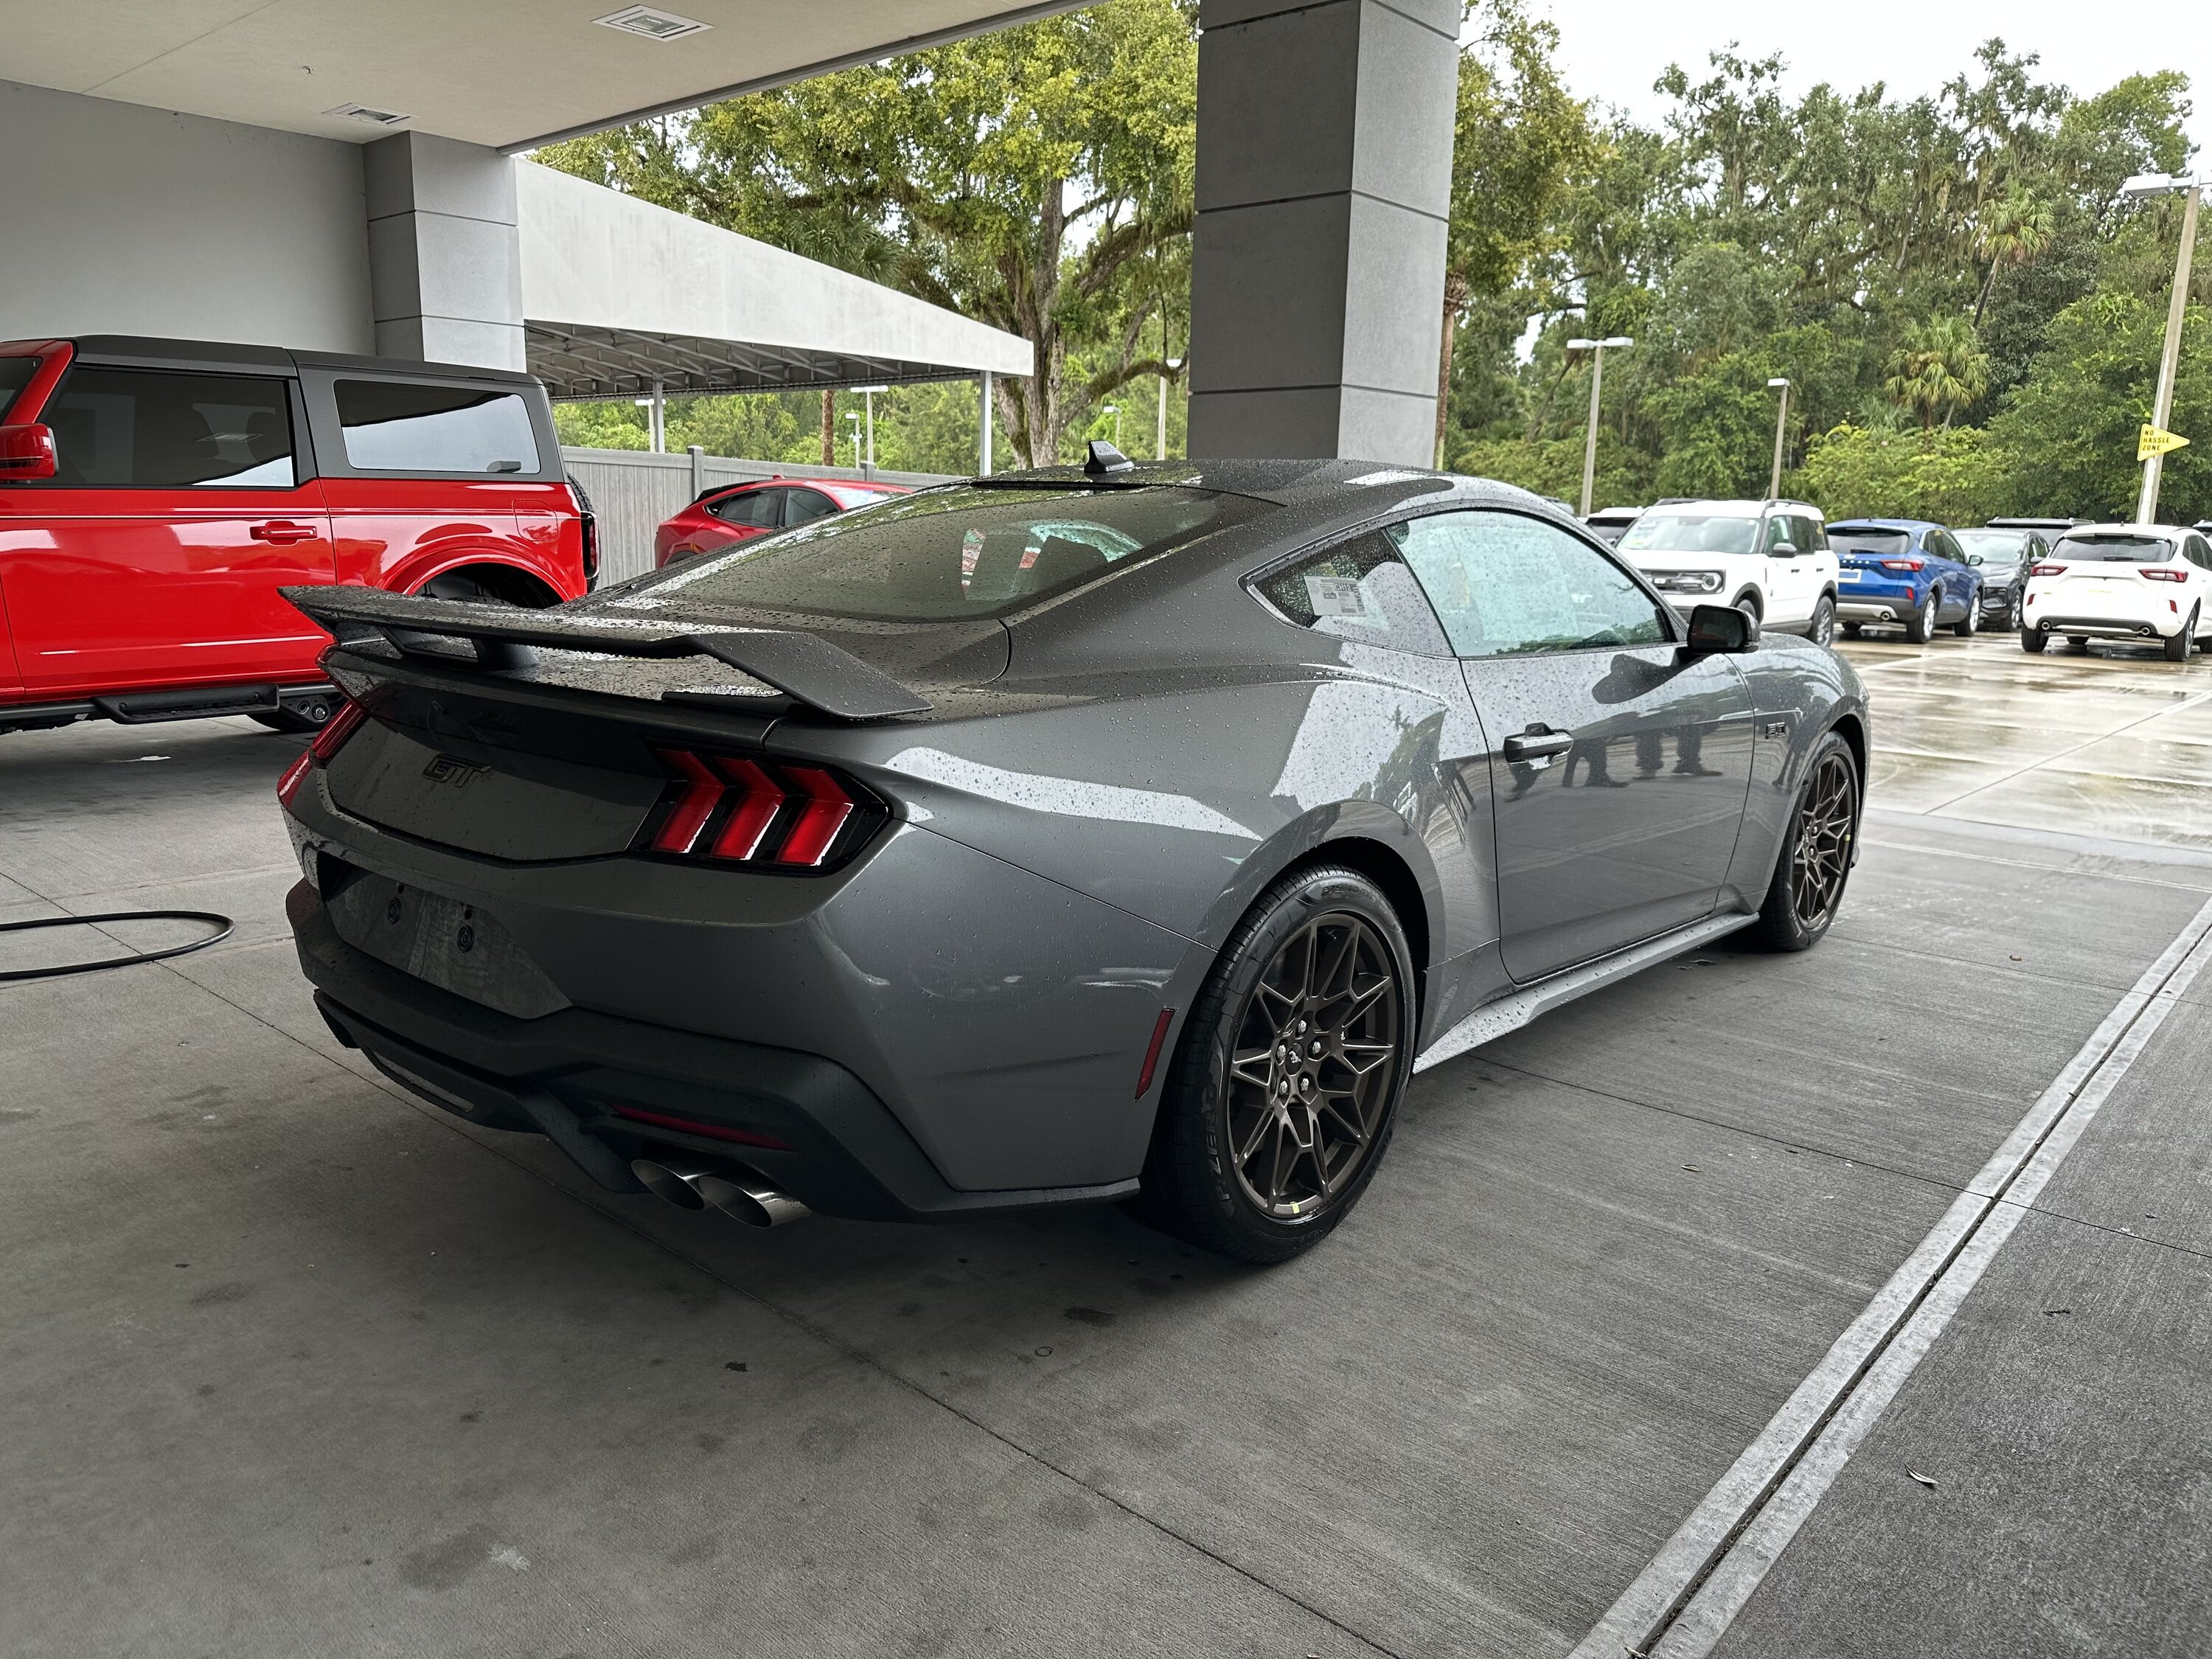 S650 Mustang BUILT & SHIPPED !! Tracker update 2023: What's your status? IMG_4227